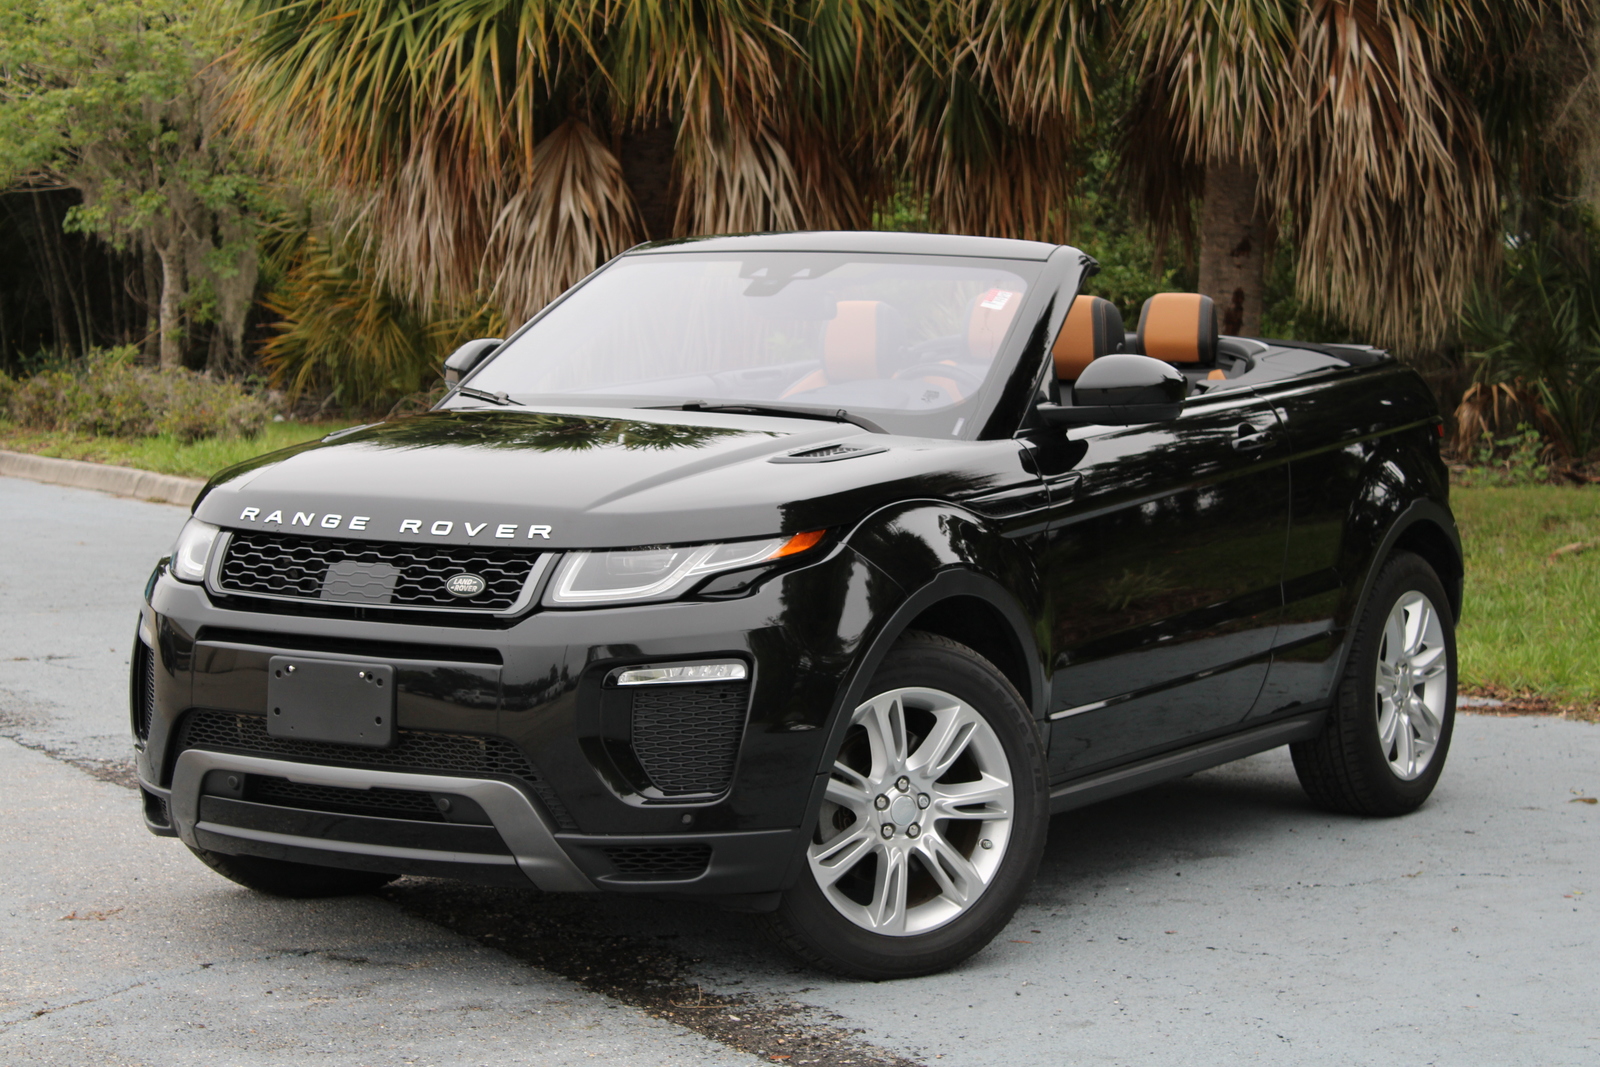 Land Rover Range Rover Evoque Hse Dynamic Convertible For Sale  - With The Largest Range Of Second Hand Land Rover Range Rover Evoque Cars Across The Uk Find Out How Much The Land Rover Range Rover Evoque New And Used Cars Sell For On Auto Trader.